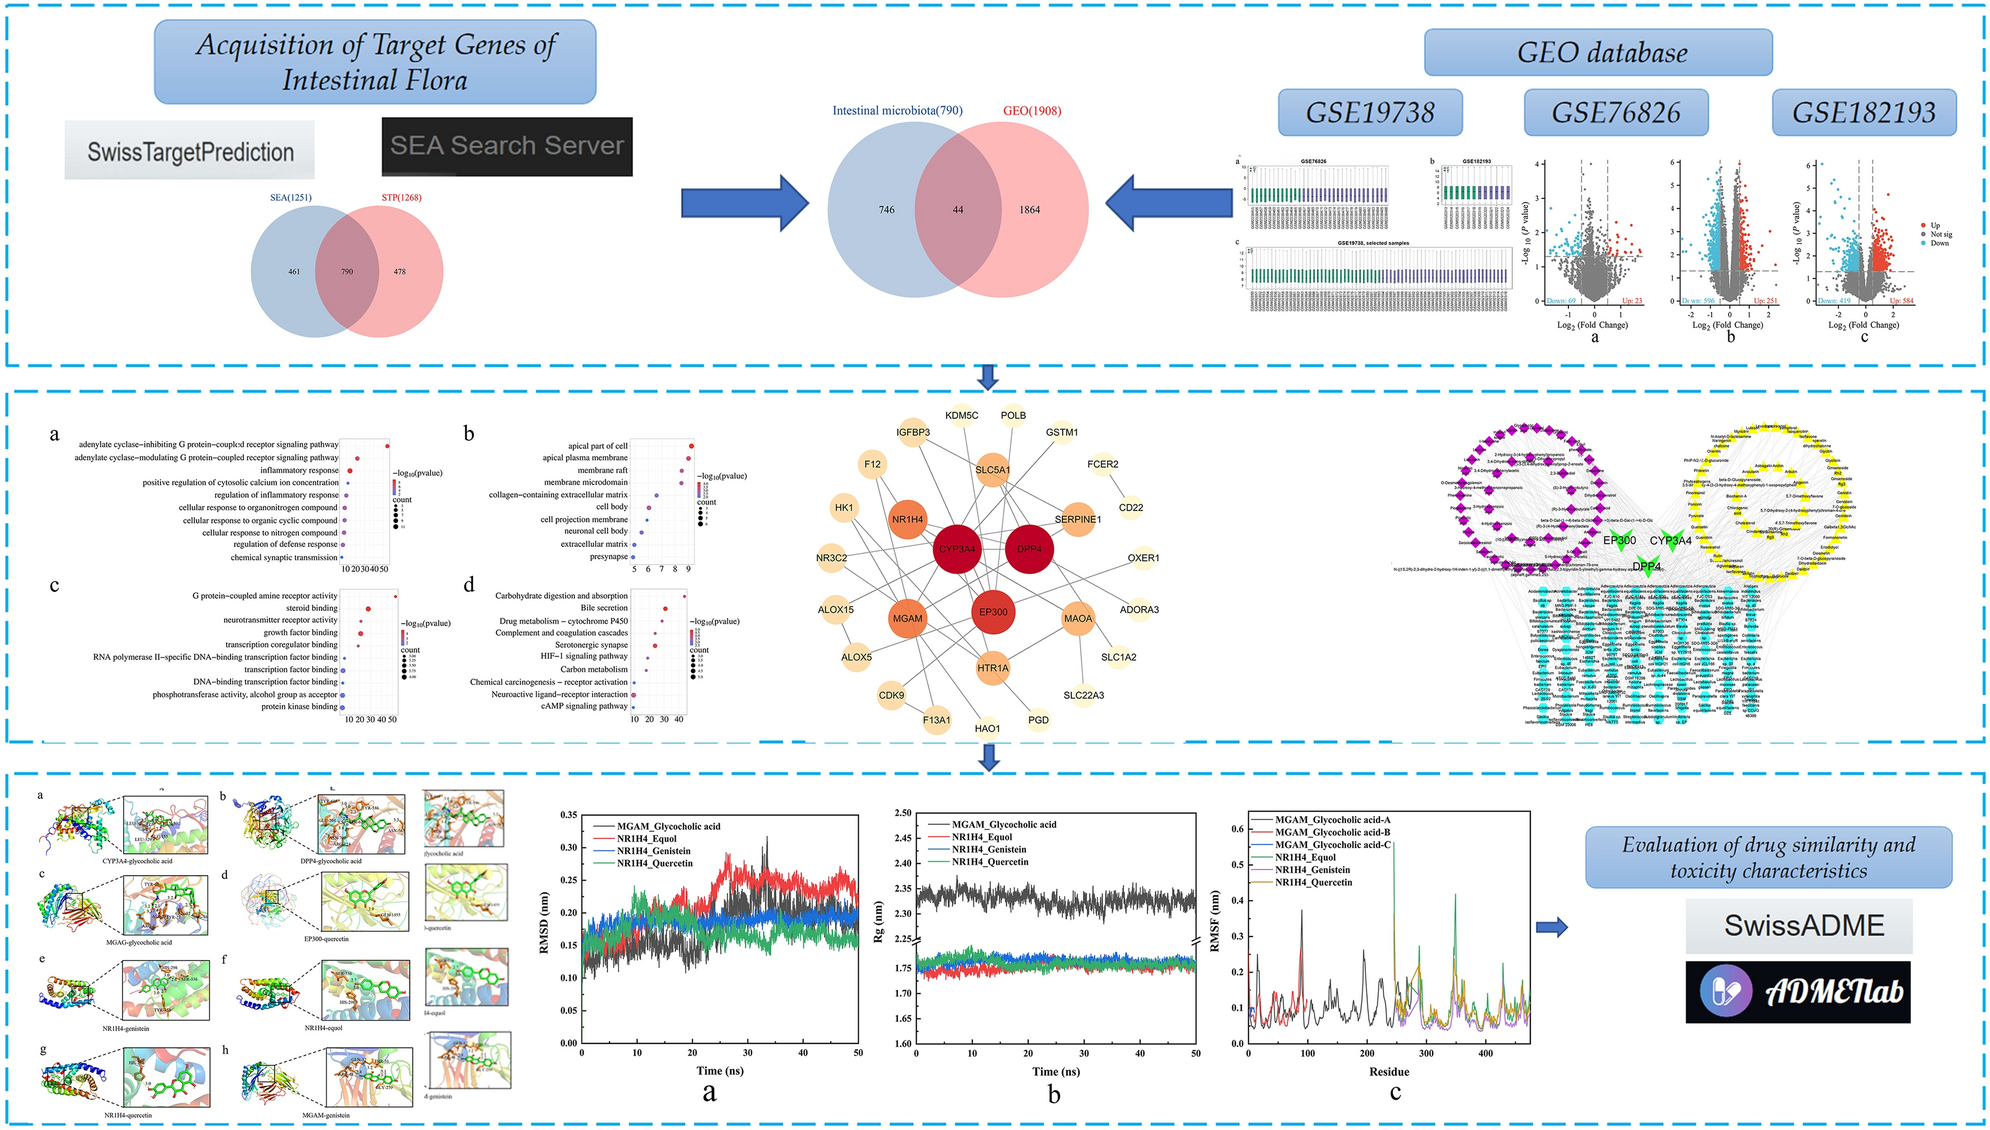 Systems biology approaches to identify potential targets and inhibitors of  the intestinal microbiota to treat depression | Scientific Reports